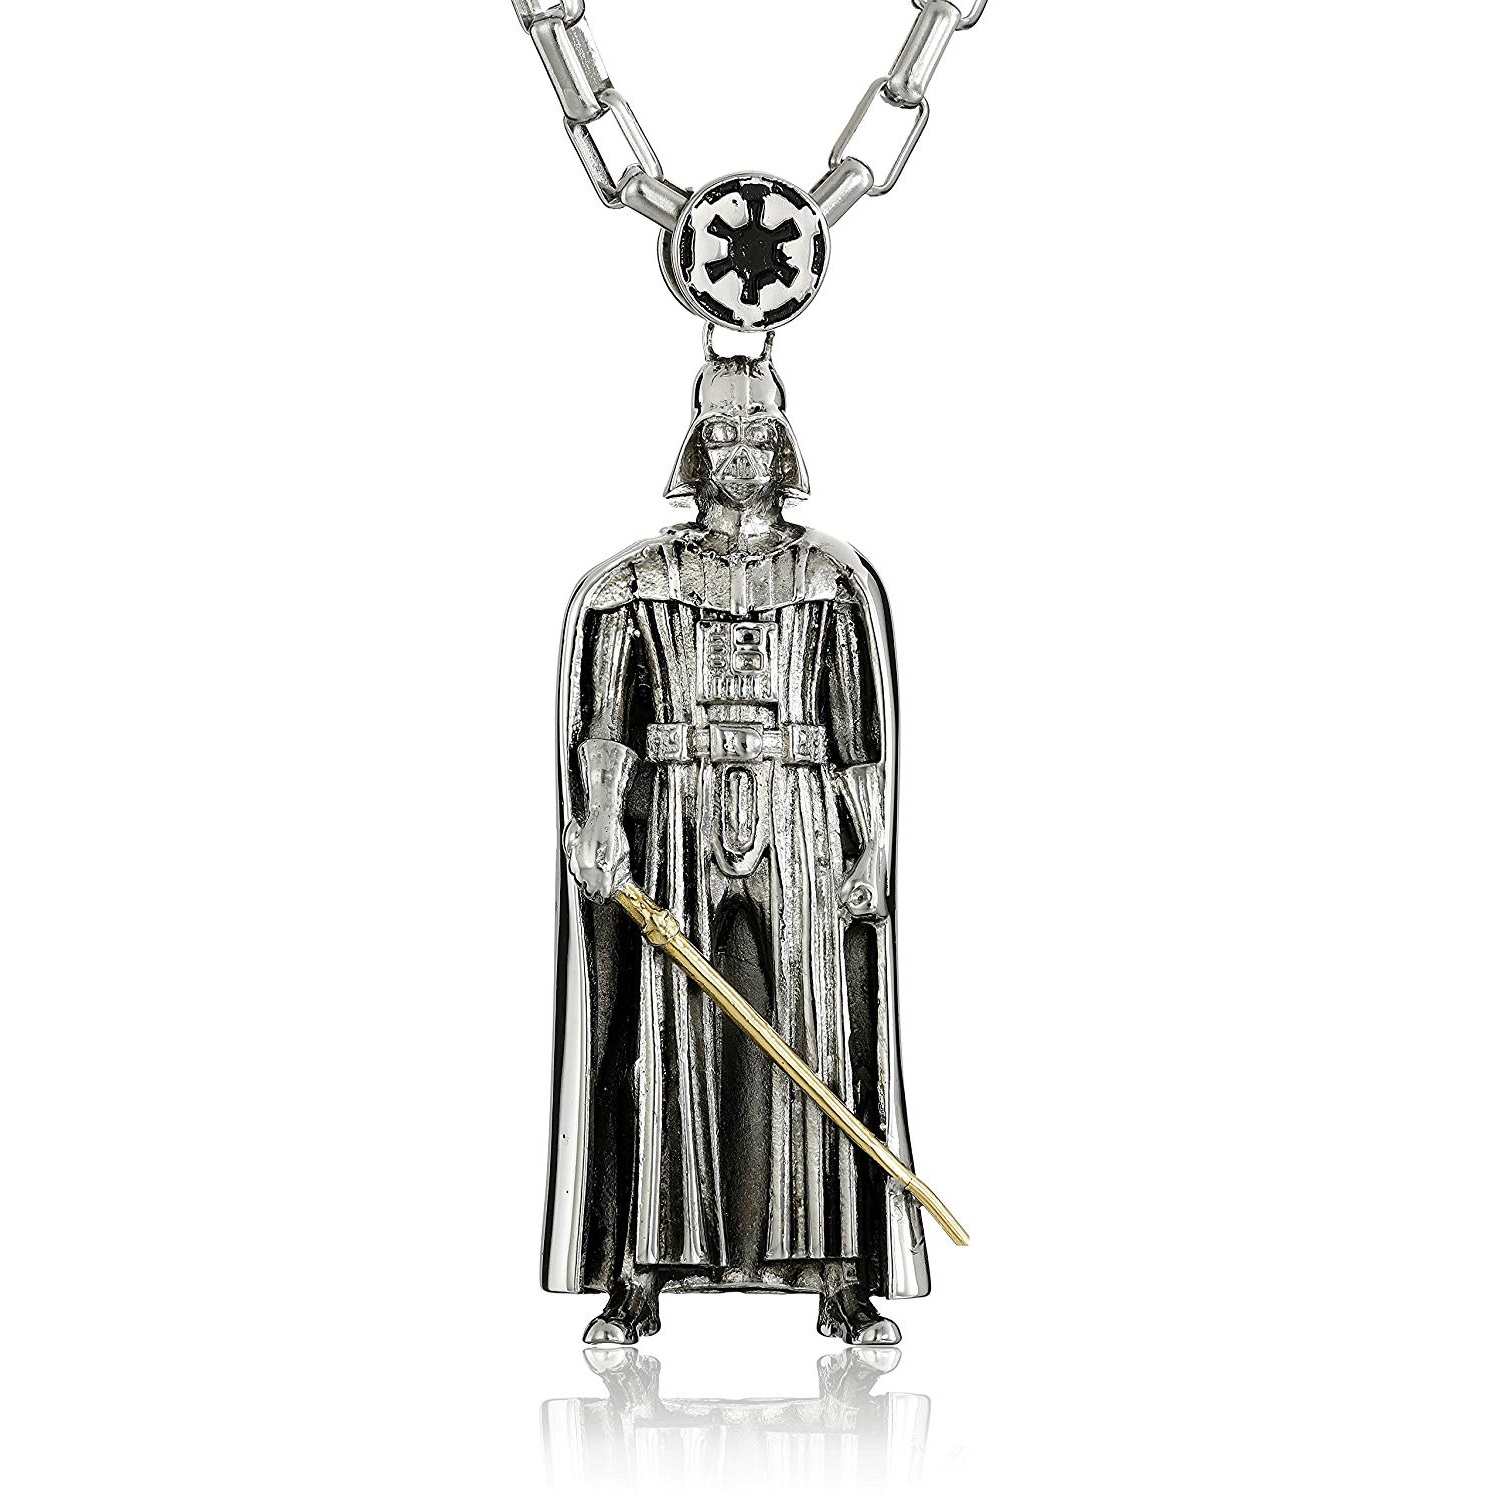 Han Cholo x Star Wars Darth Vader Stainless Steel Necklace on Amazon